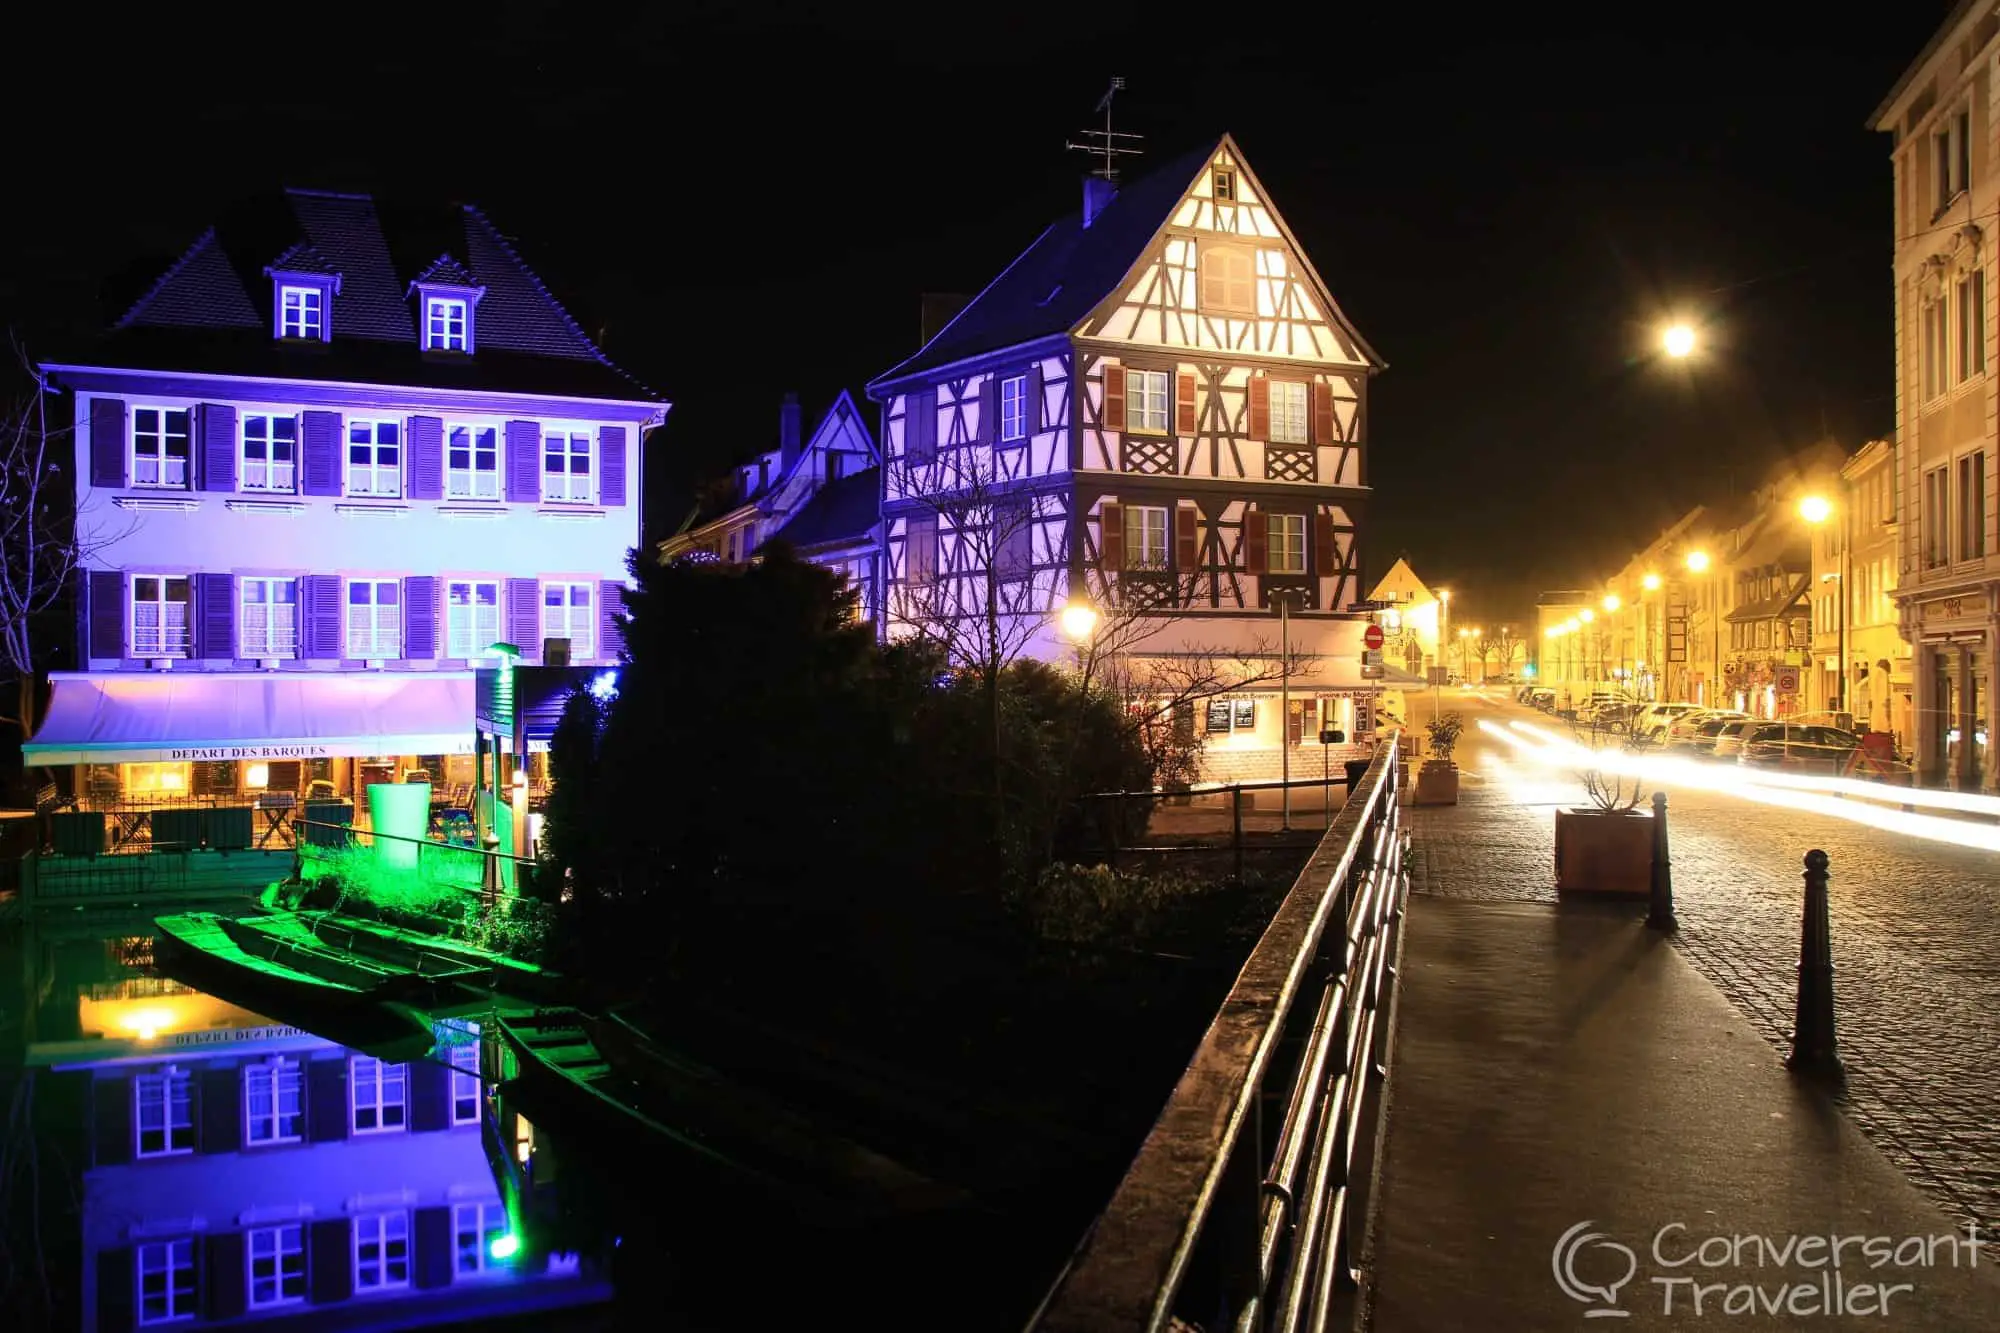 Most mesmerising at night, La Petite Venise is one of Colmar's highlights